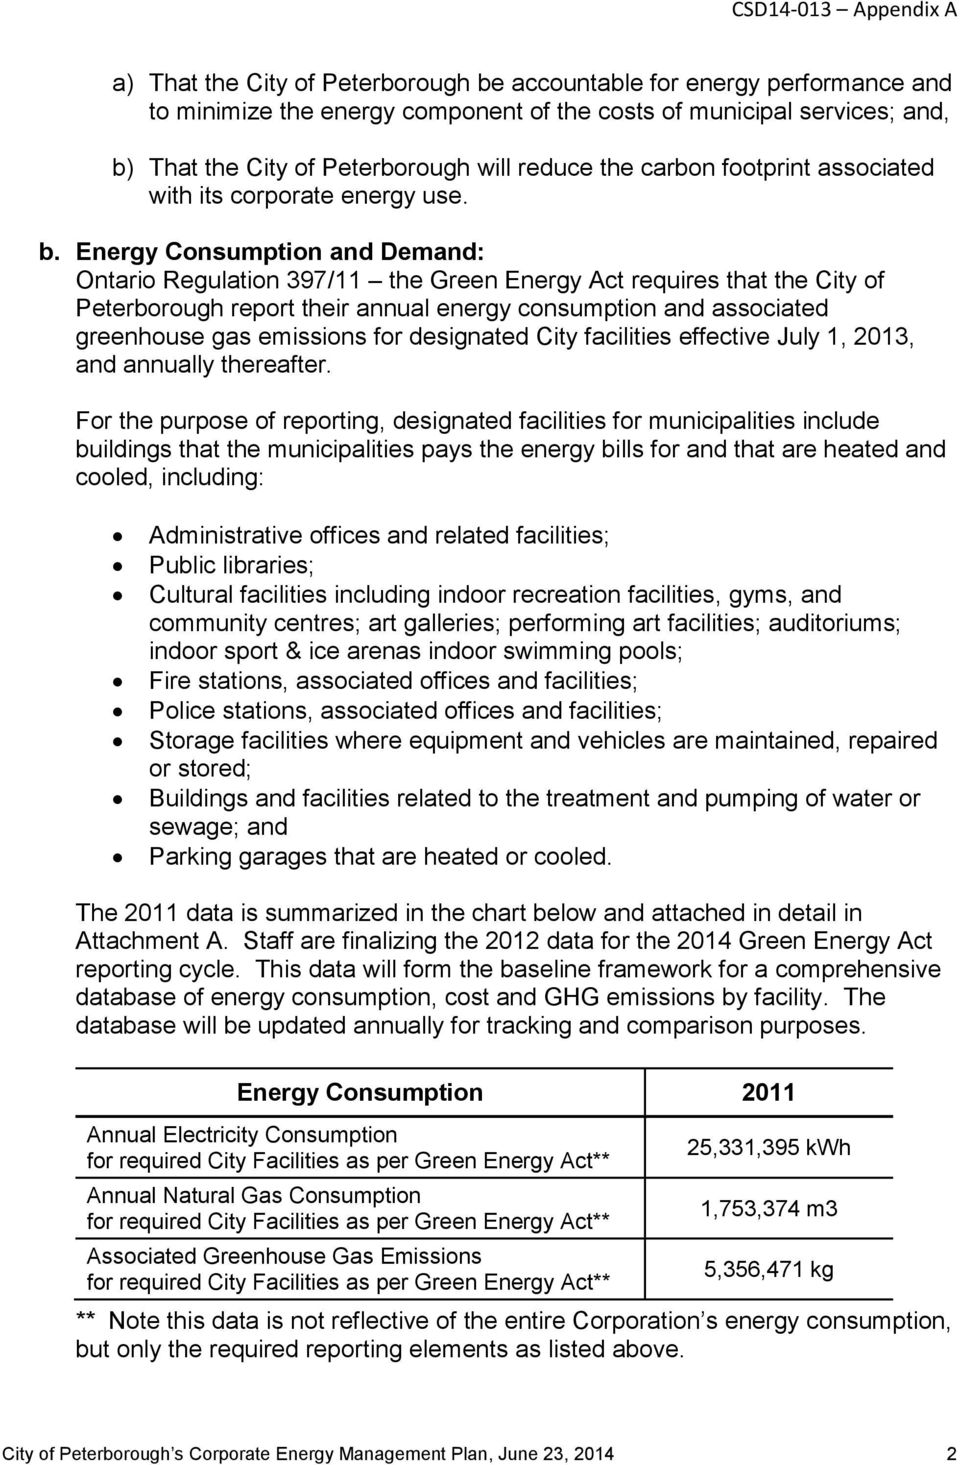 Energy Consumption and Demand: Ontario Regulation 397/11 the Green Energy Act requires that the City of Peterborough report their annual energy consumption and associated greenhouse gas emissions for